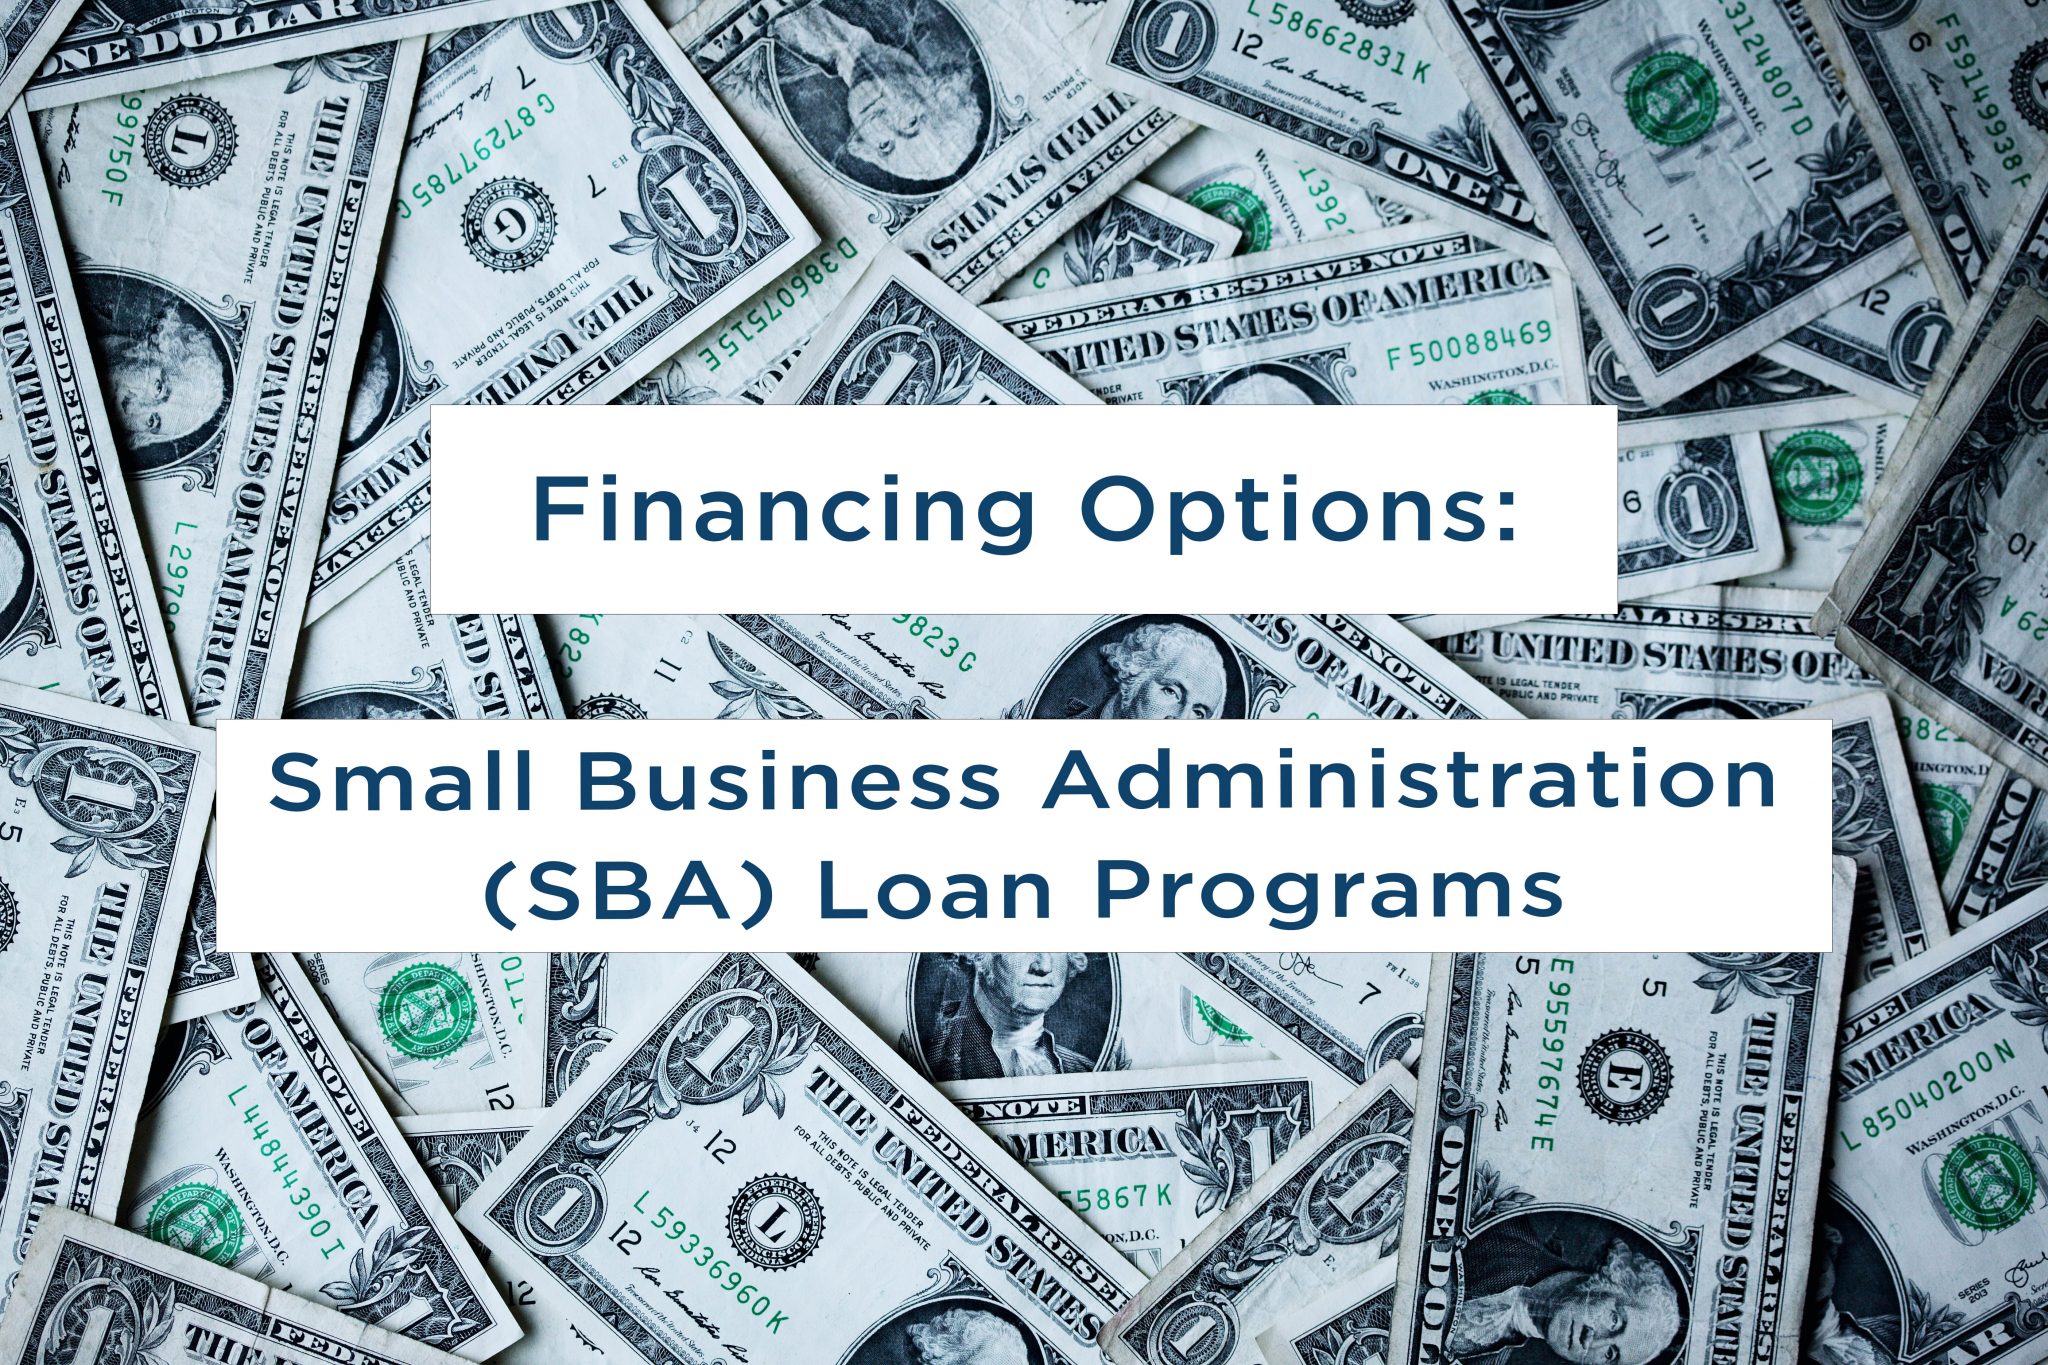 Financing Options: Small Business Administration SBA Loan Programs Cover with Money (Dollar Bills)